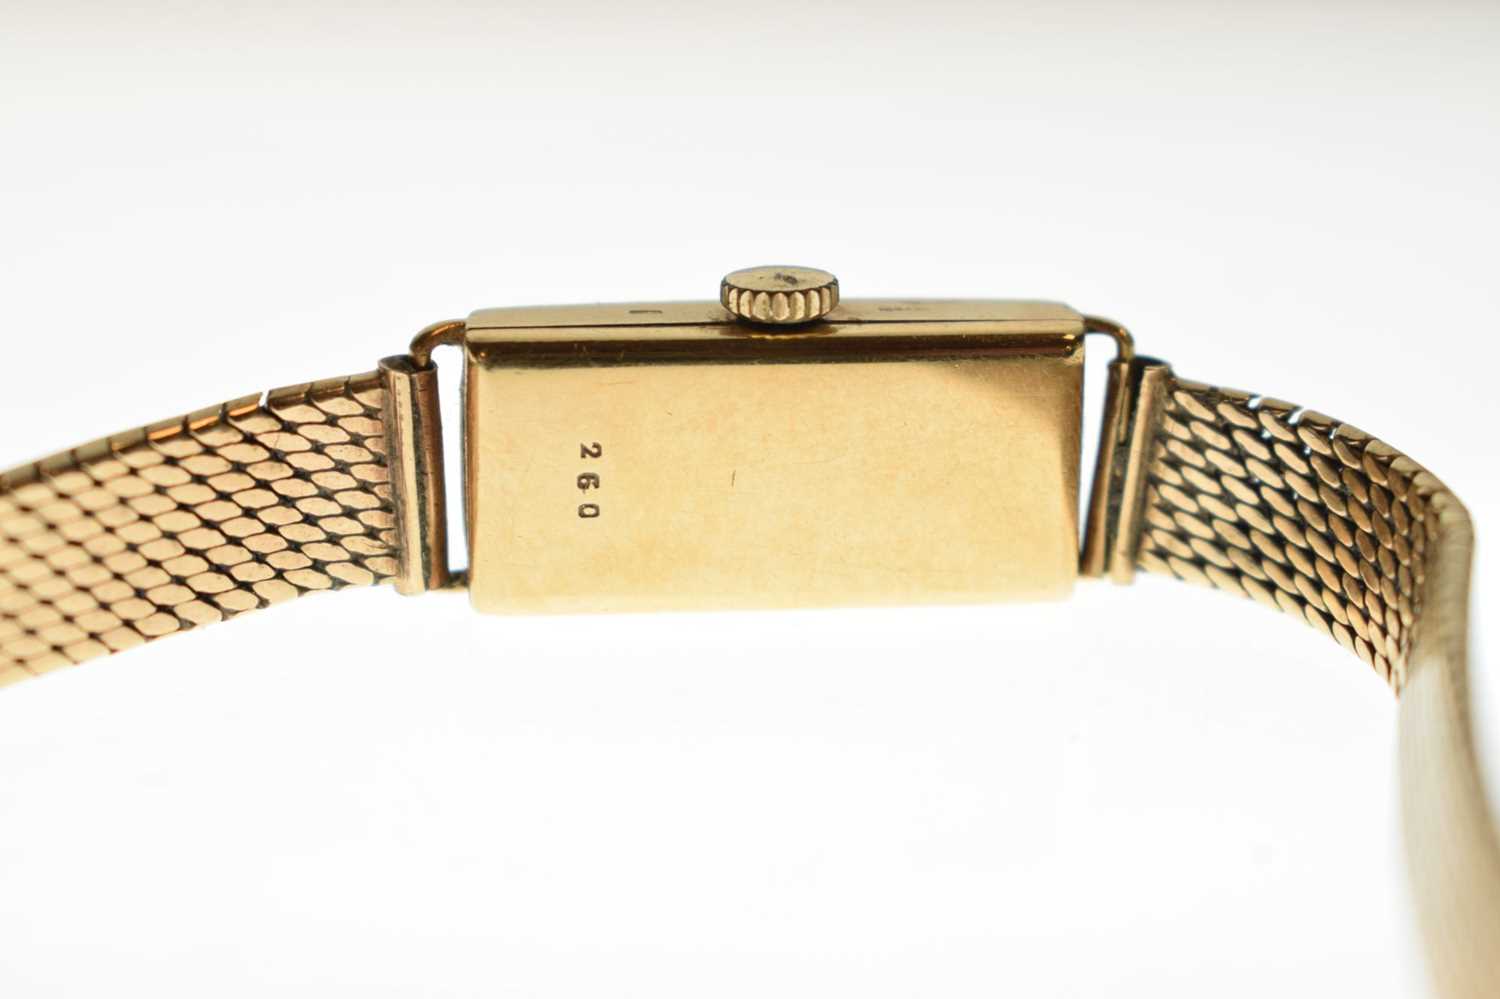 Watches of Switzerland - Lady's 18ct gold cased bracelet watch - Image 9 of 9